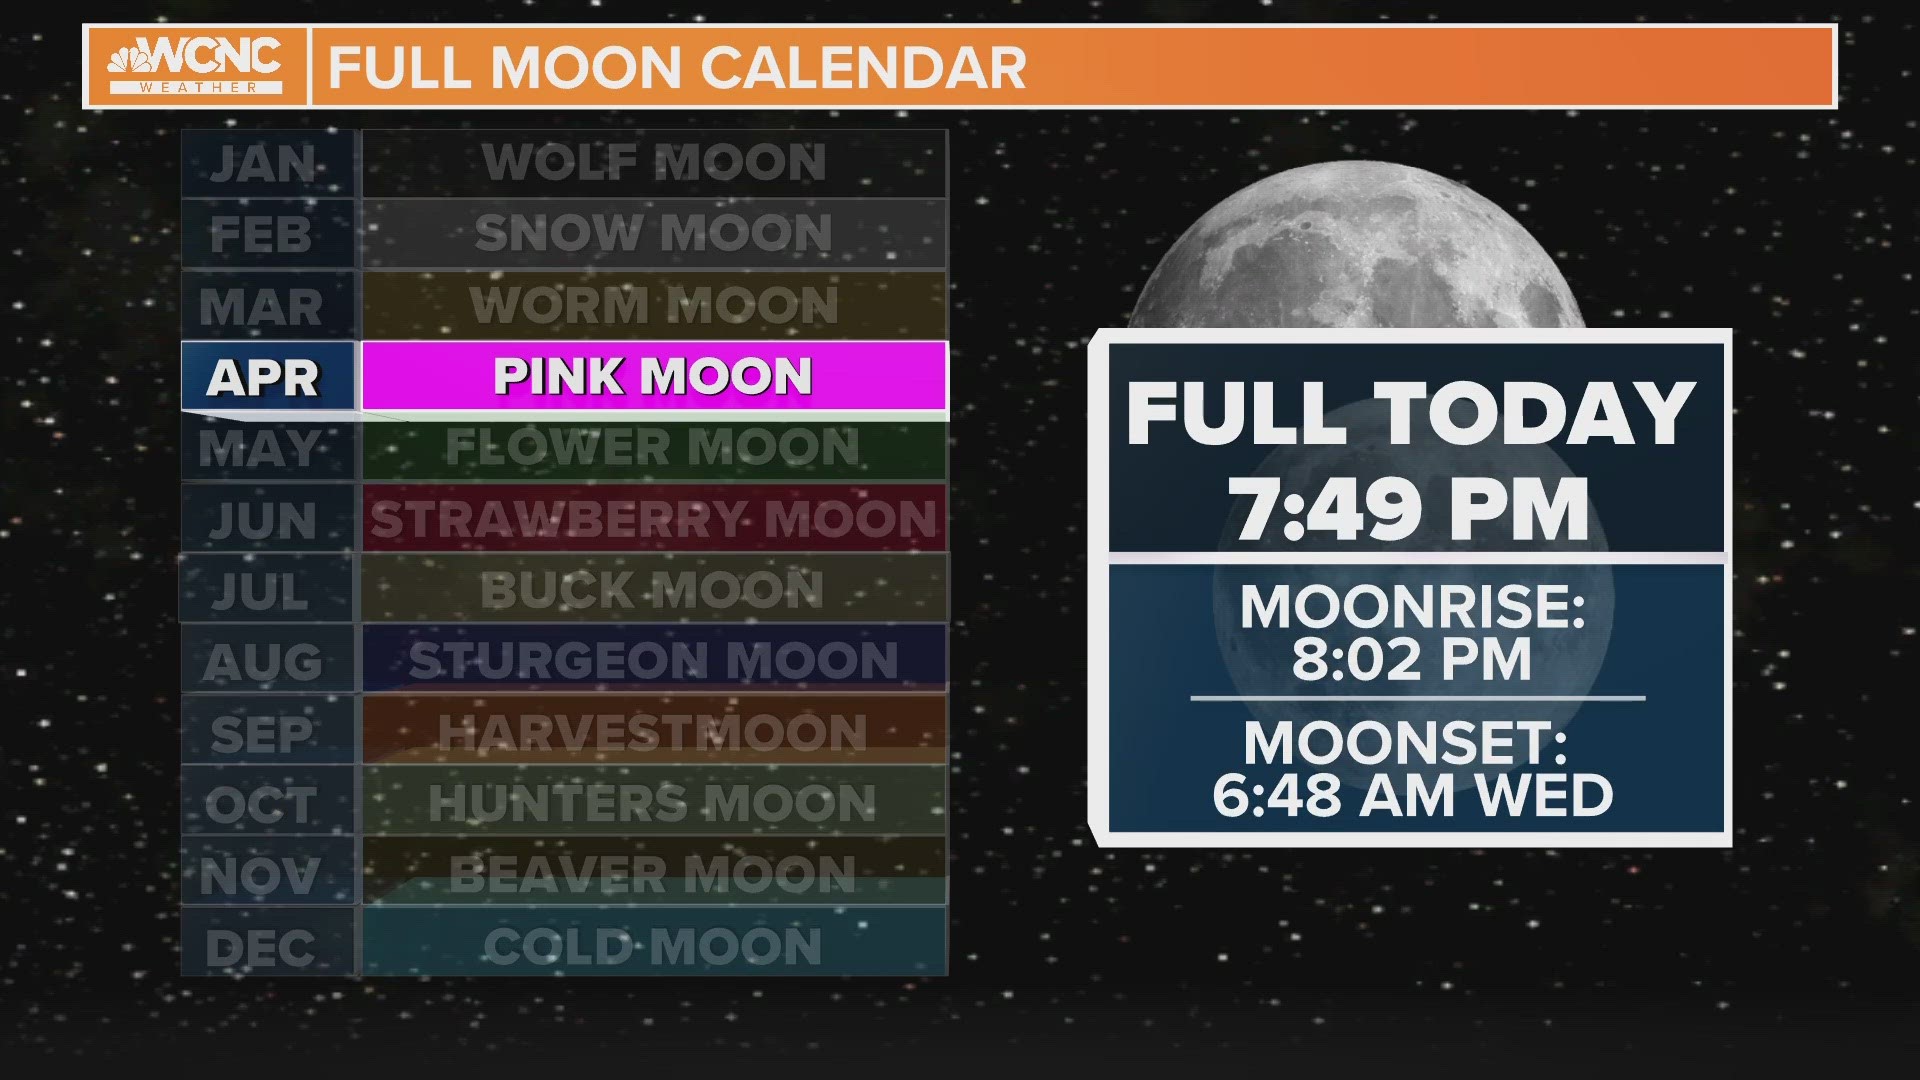 Meteorologist Chris Mulcahy breaks down what you can expect (and what you won't see) during the full pink moon on Tuesday.